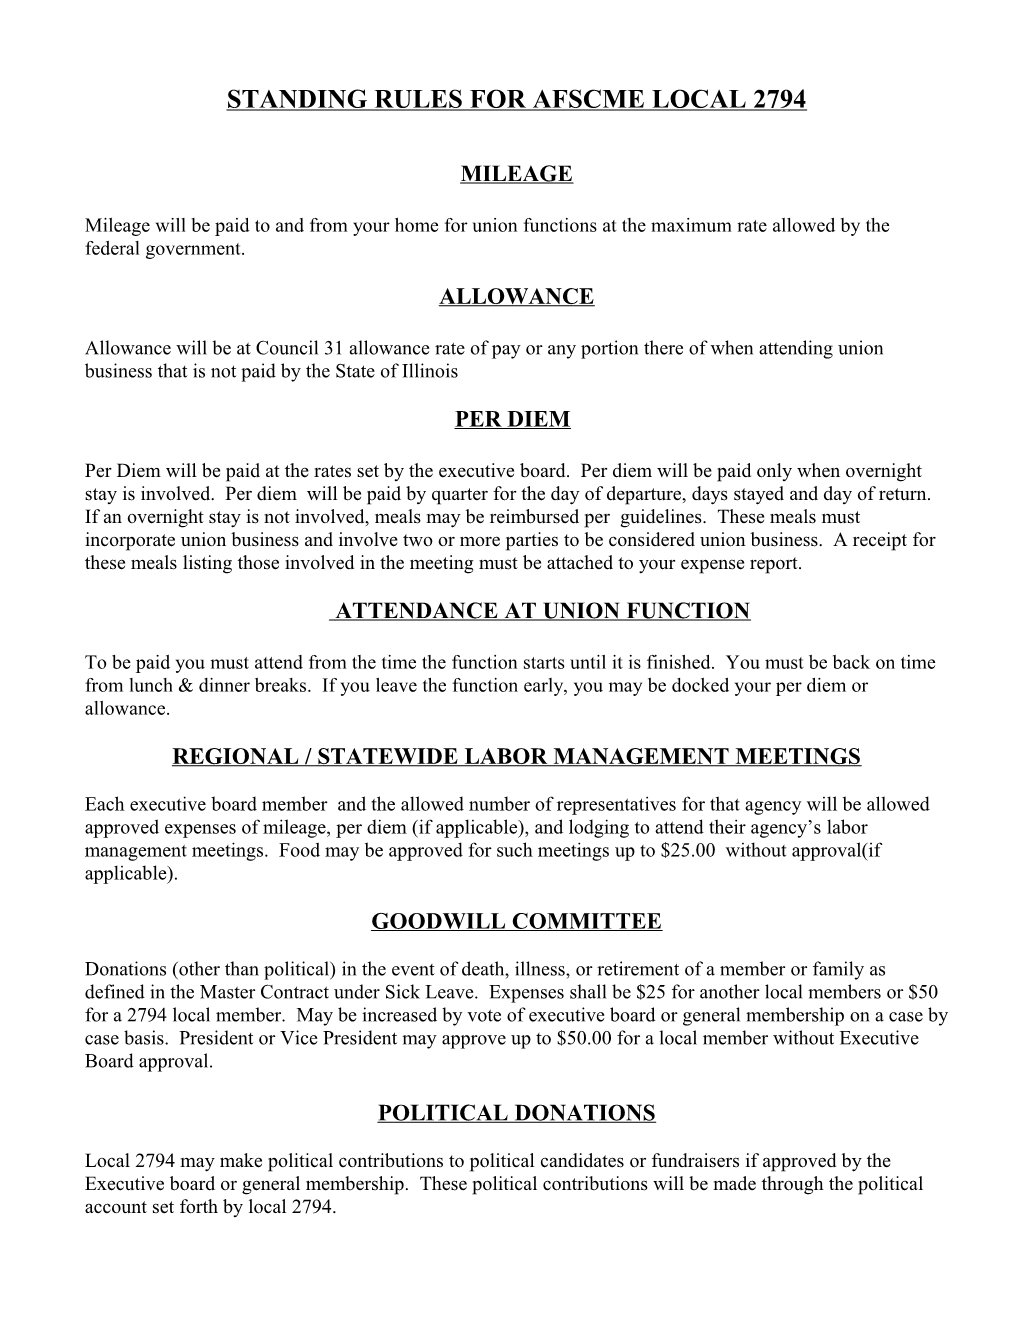 Standing Rules for Afscme Local 448